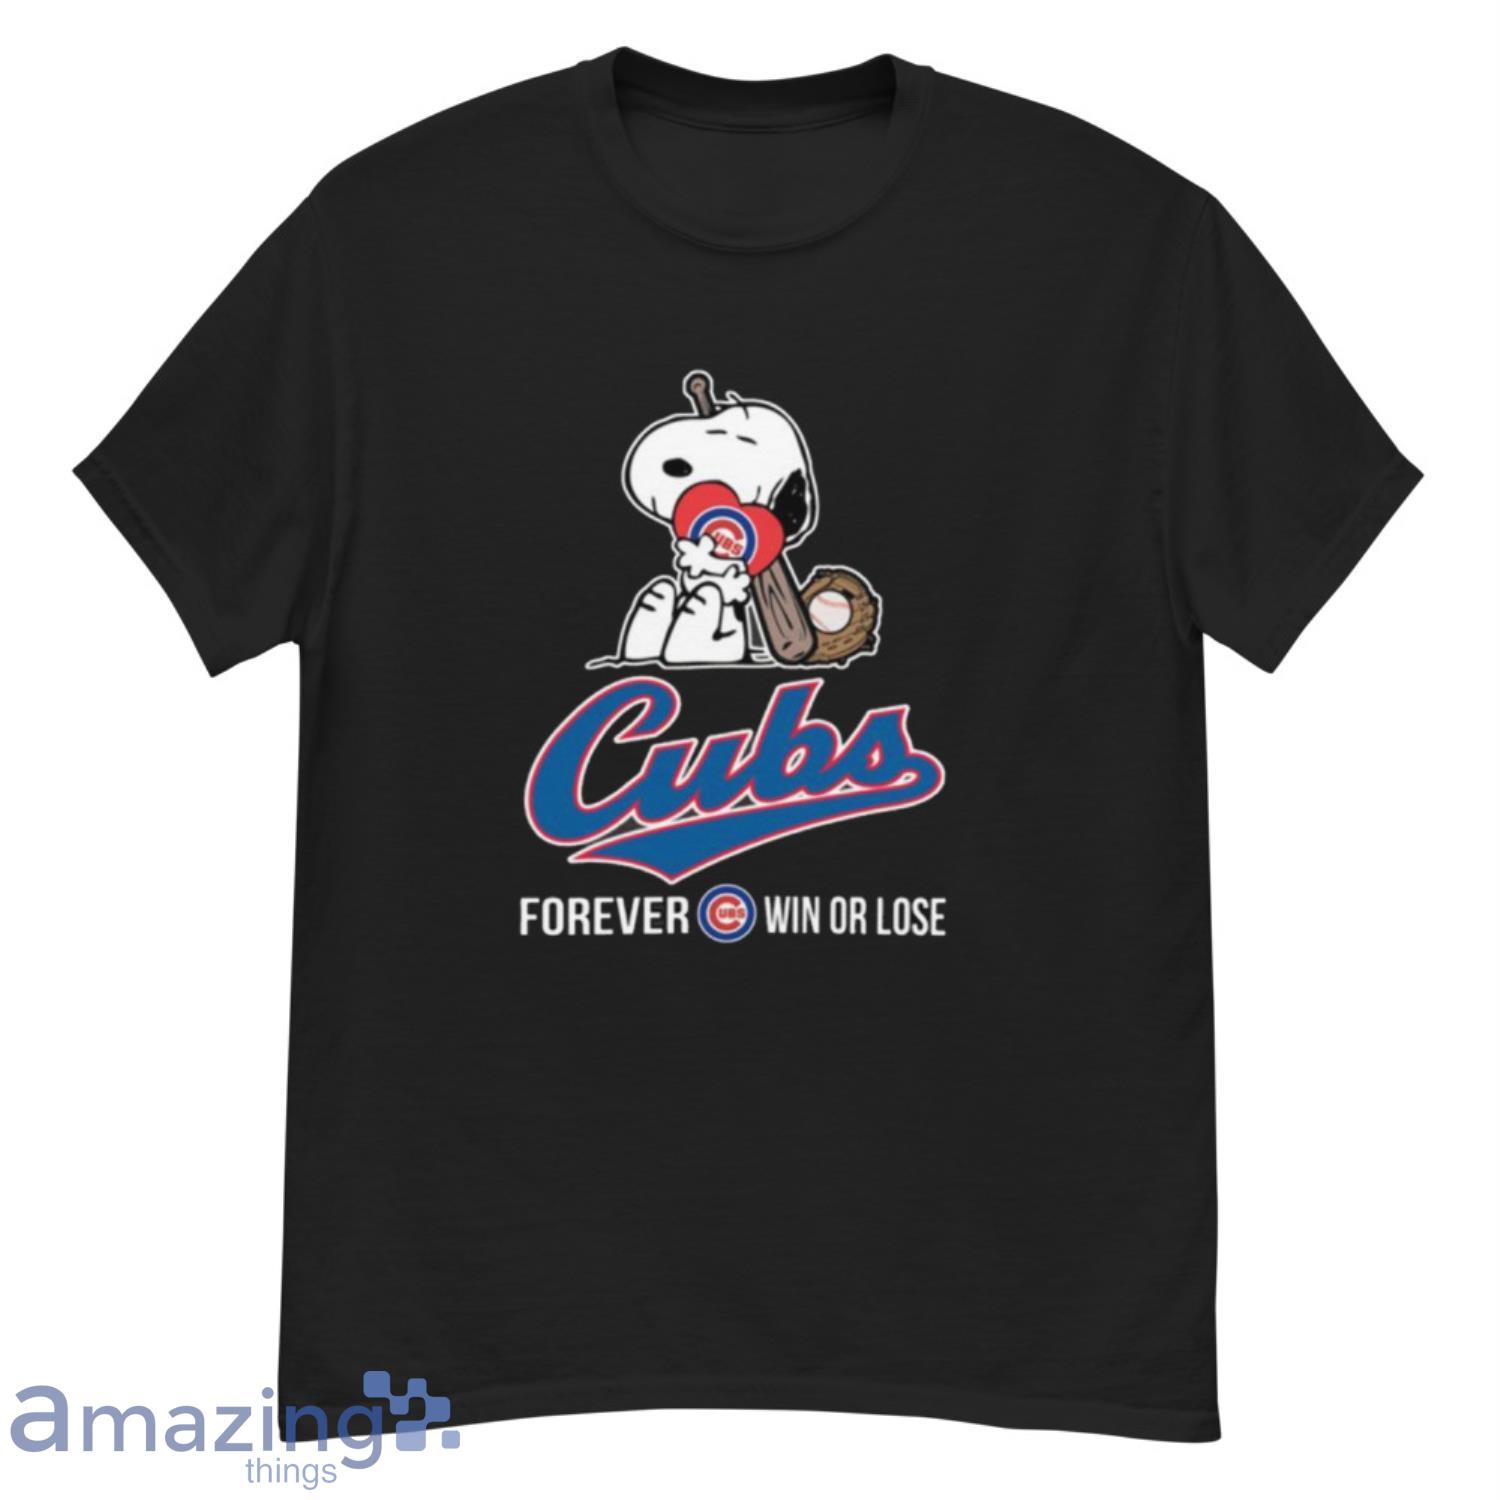 I'm Mother and a Chicago Cubs fan which means I'm pretty much perfect shirt,  hoodie, sweater, long sleeve and tank top